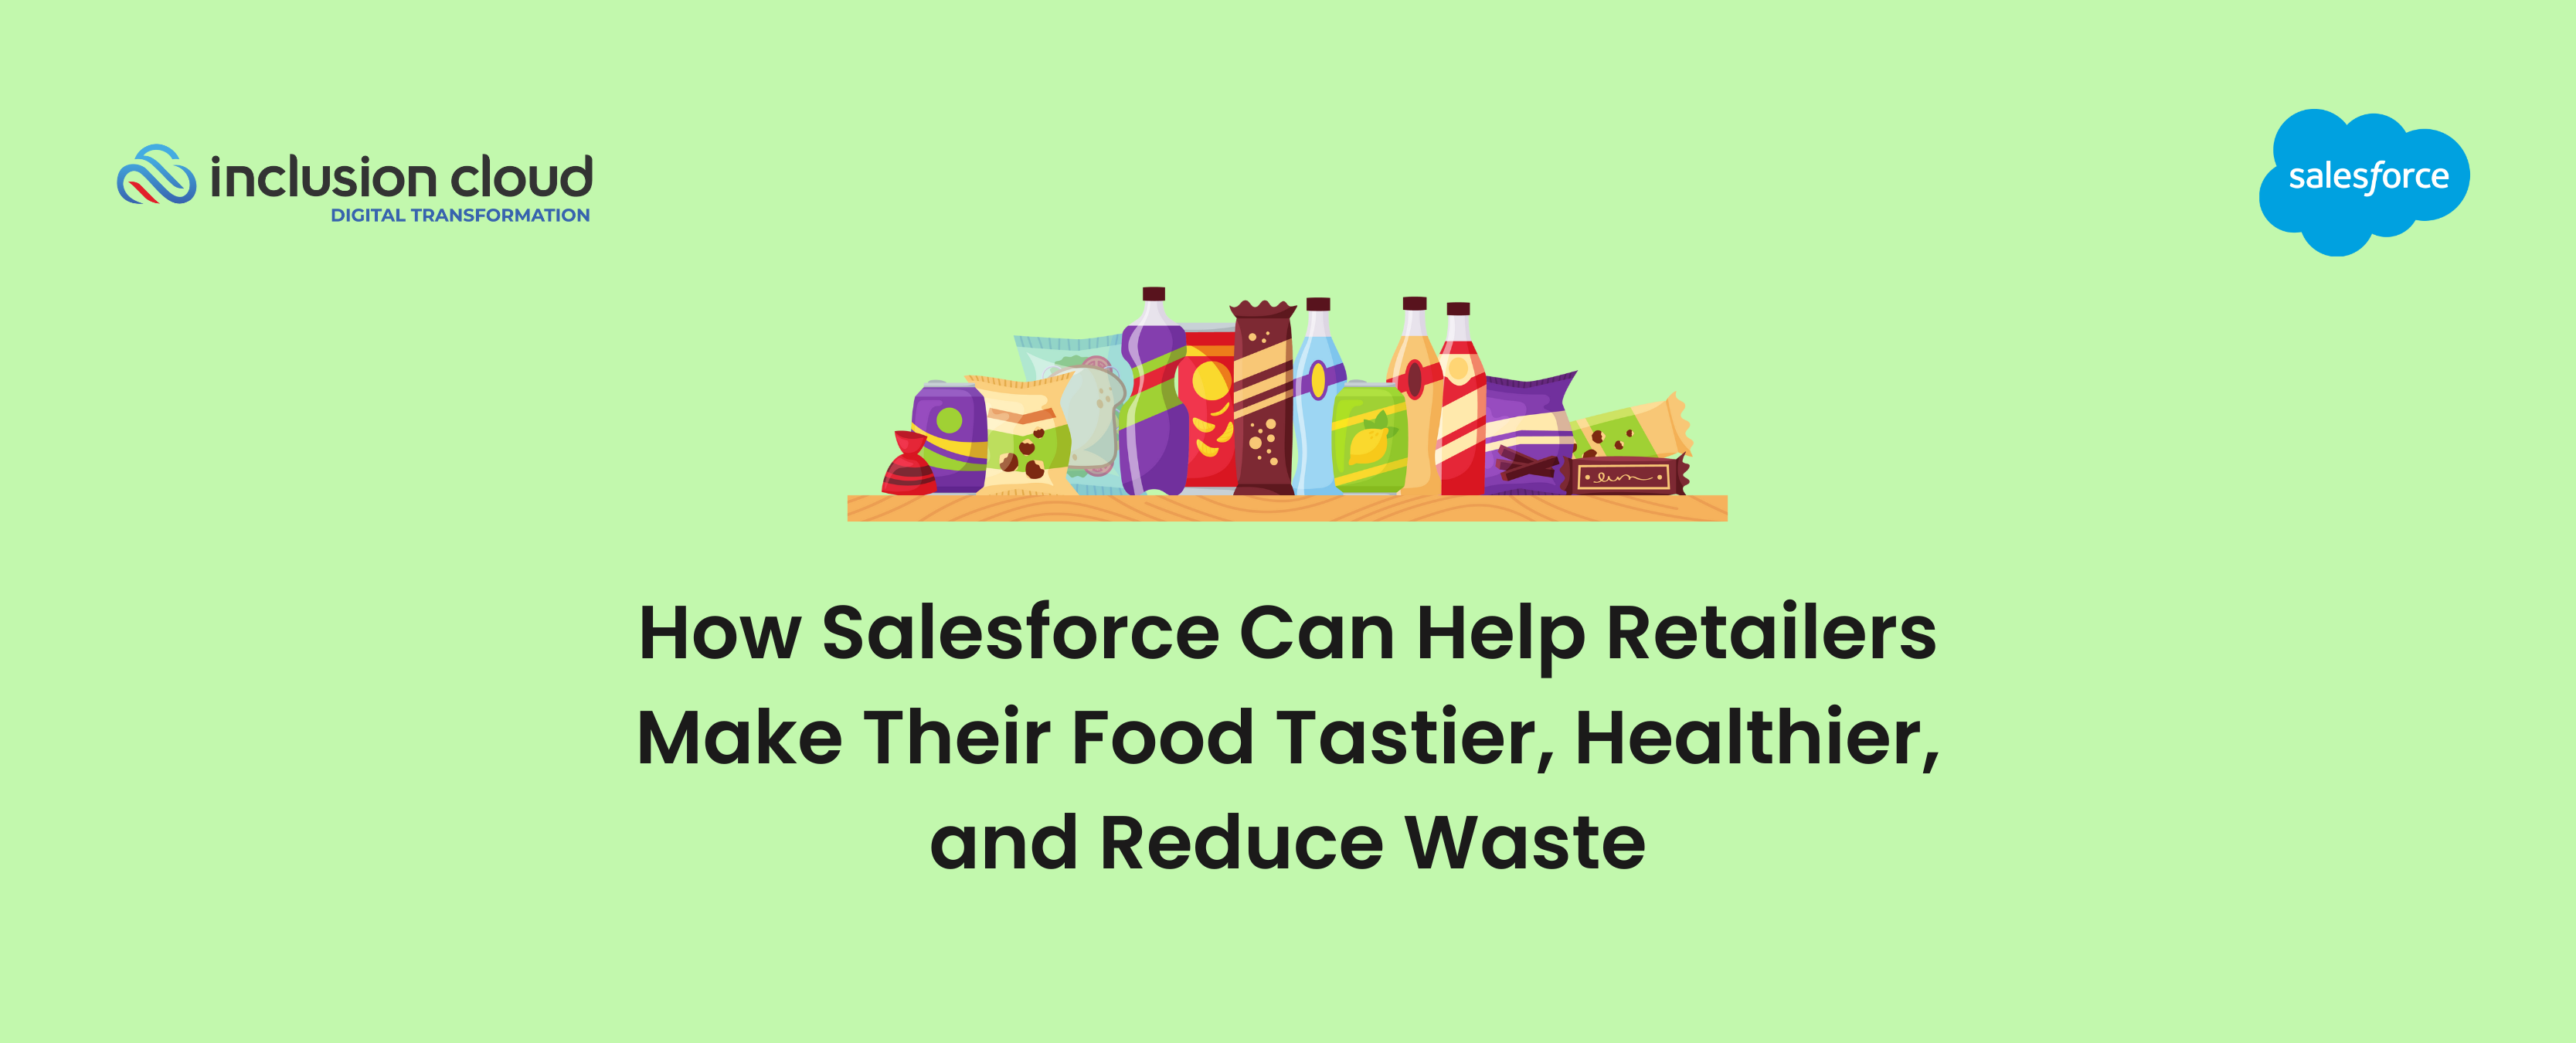 How Salesforce Can Help Retailers Make Their Food Tastier, Healthier, and Reduce Waste